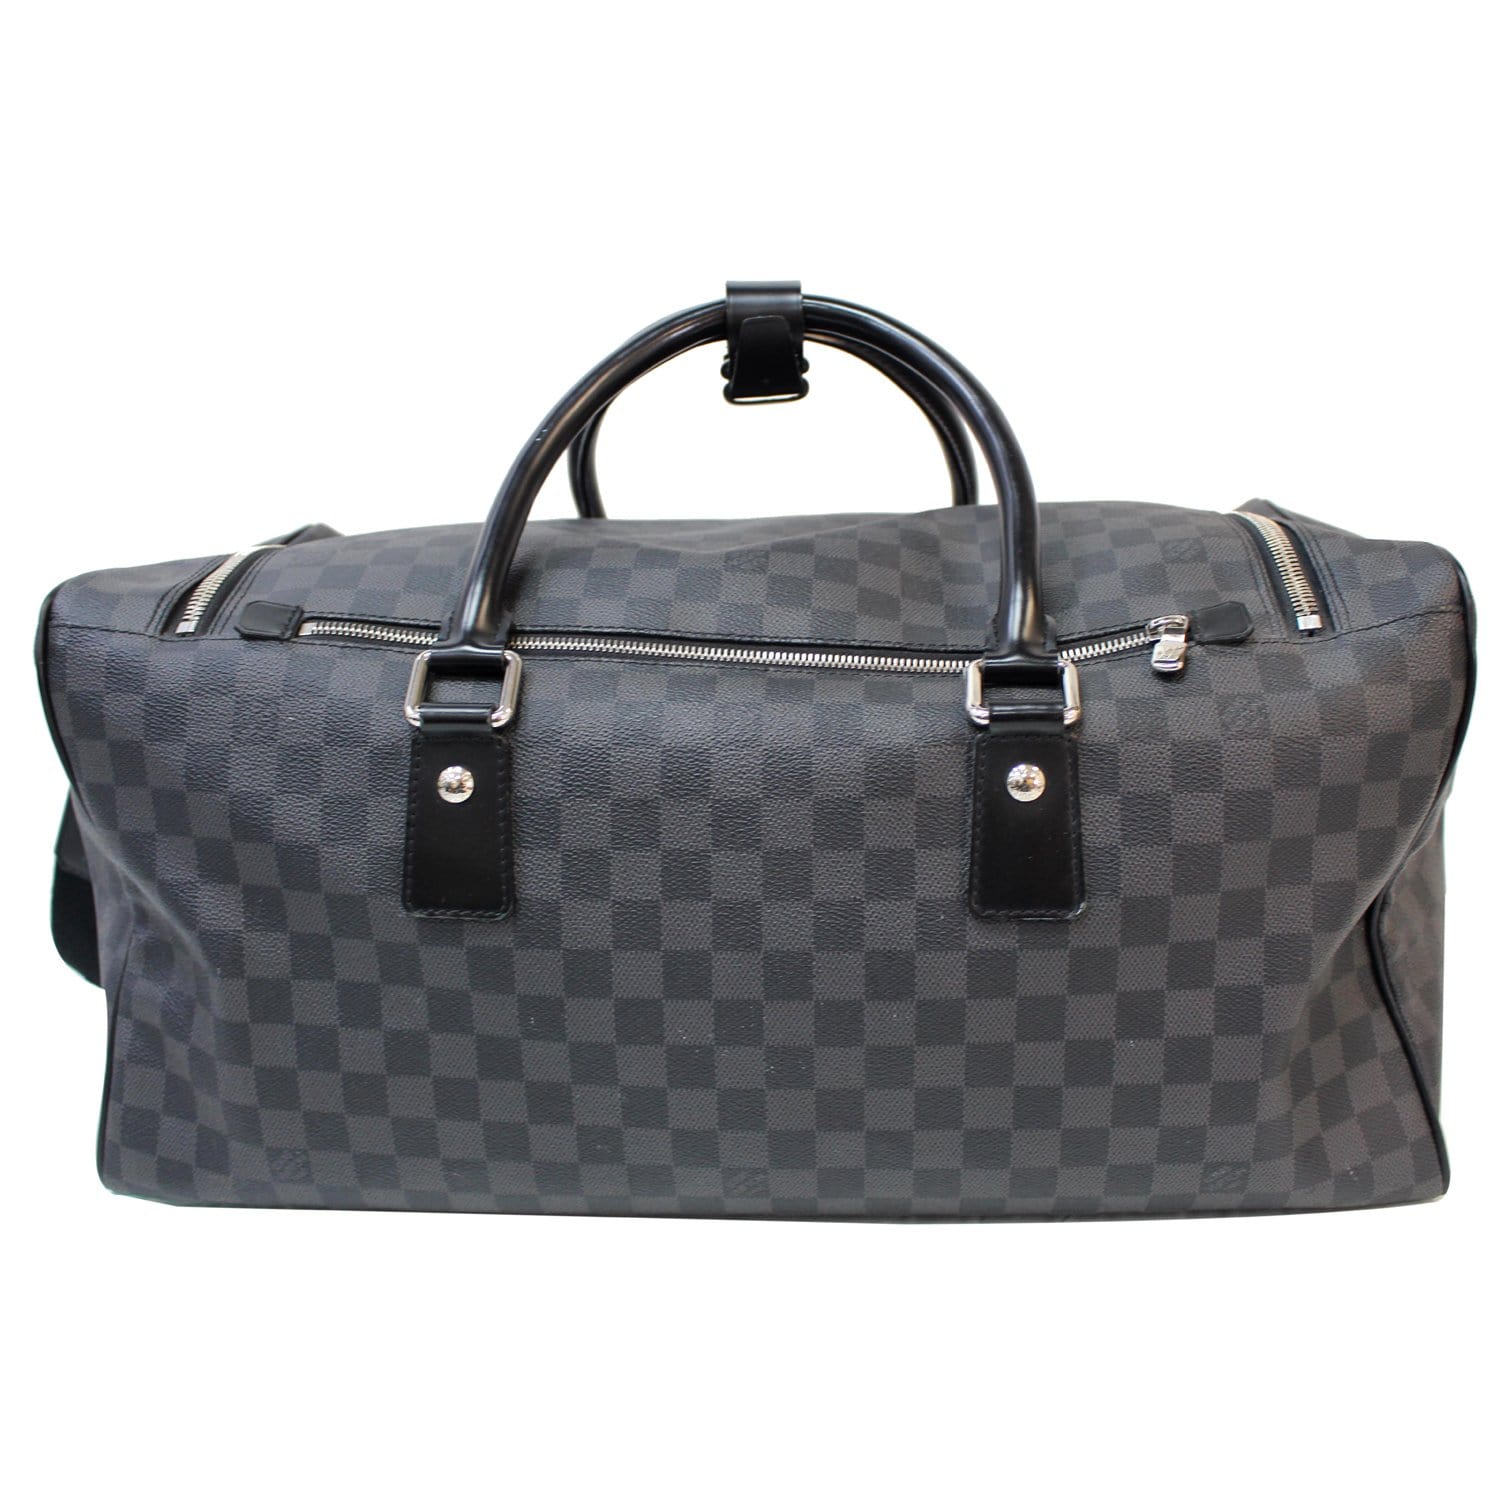 Louis Vuitton Roadster Duffle Bag Damier Graphite Black Weekend Travel  Carry On